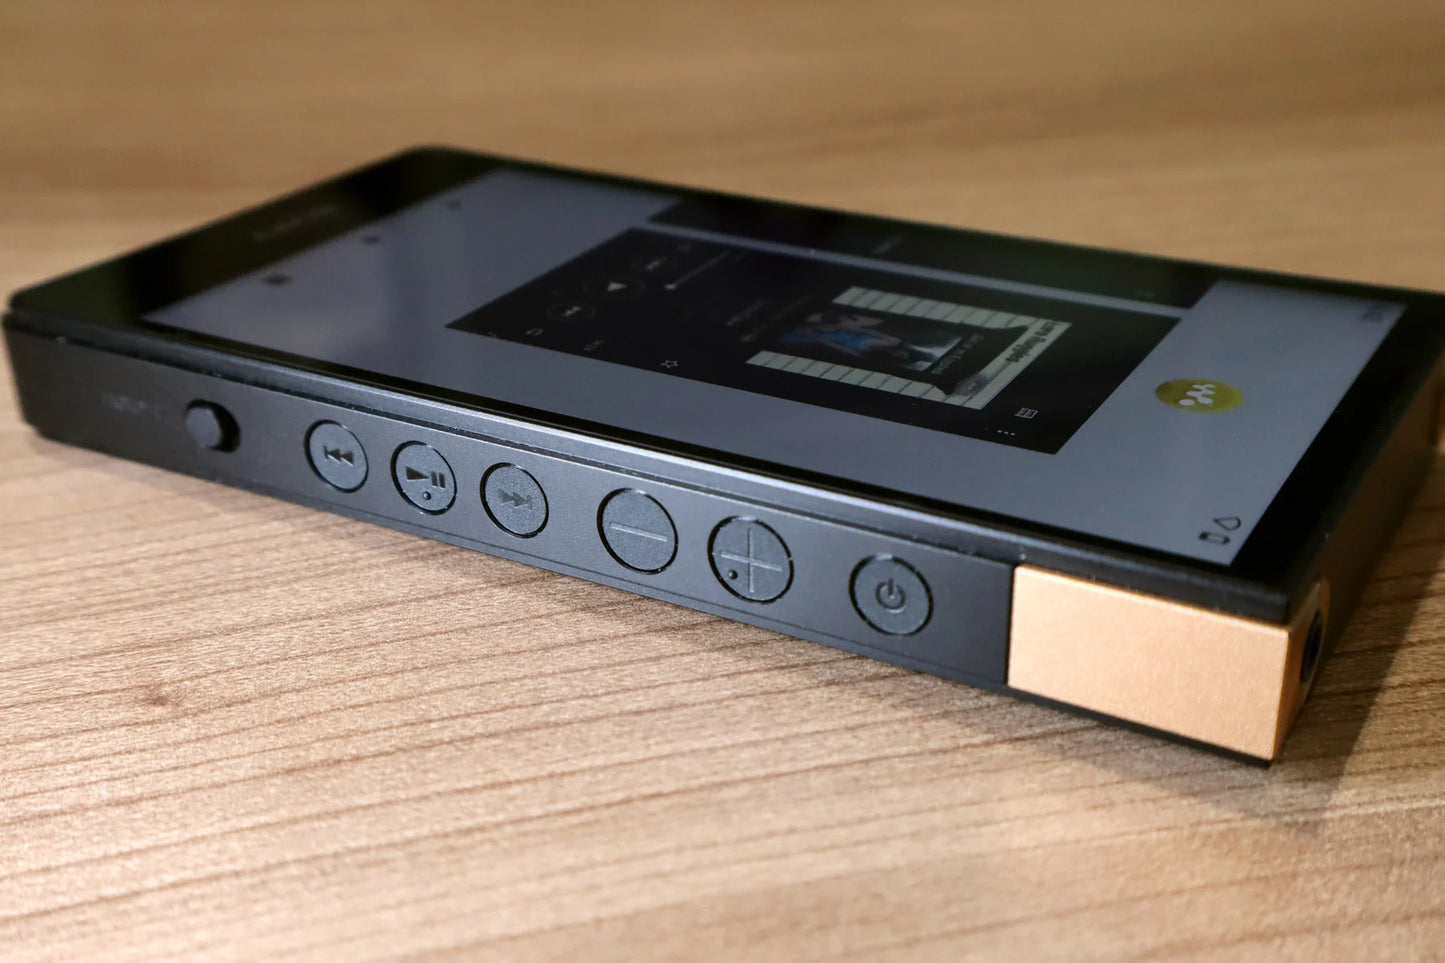 SONY NW-ZX707 Hi-Res Digital Audio Player DAP with 64 GB Internal Memory in Android OS HONG KONG Version